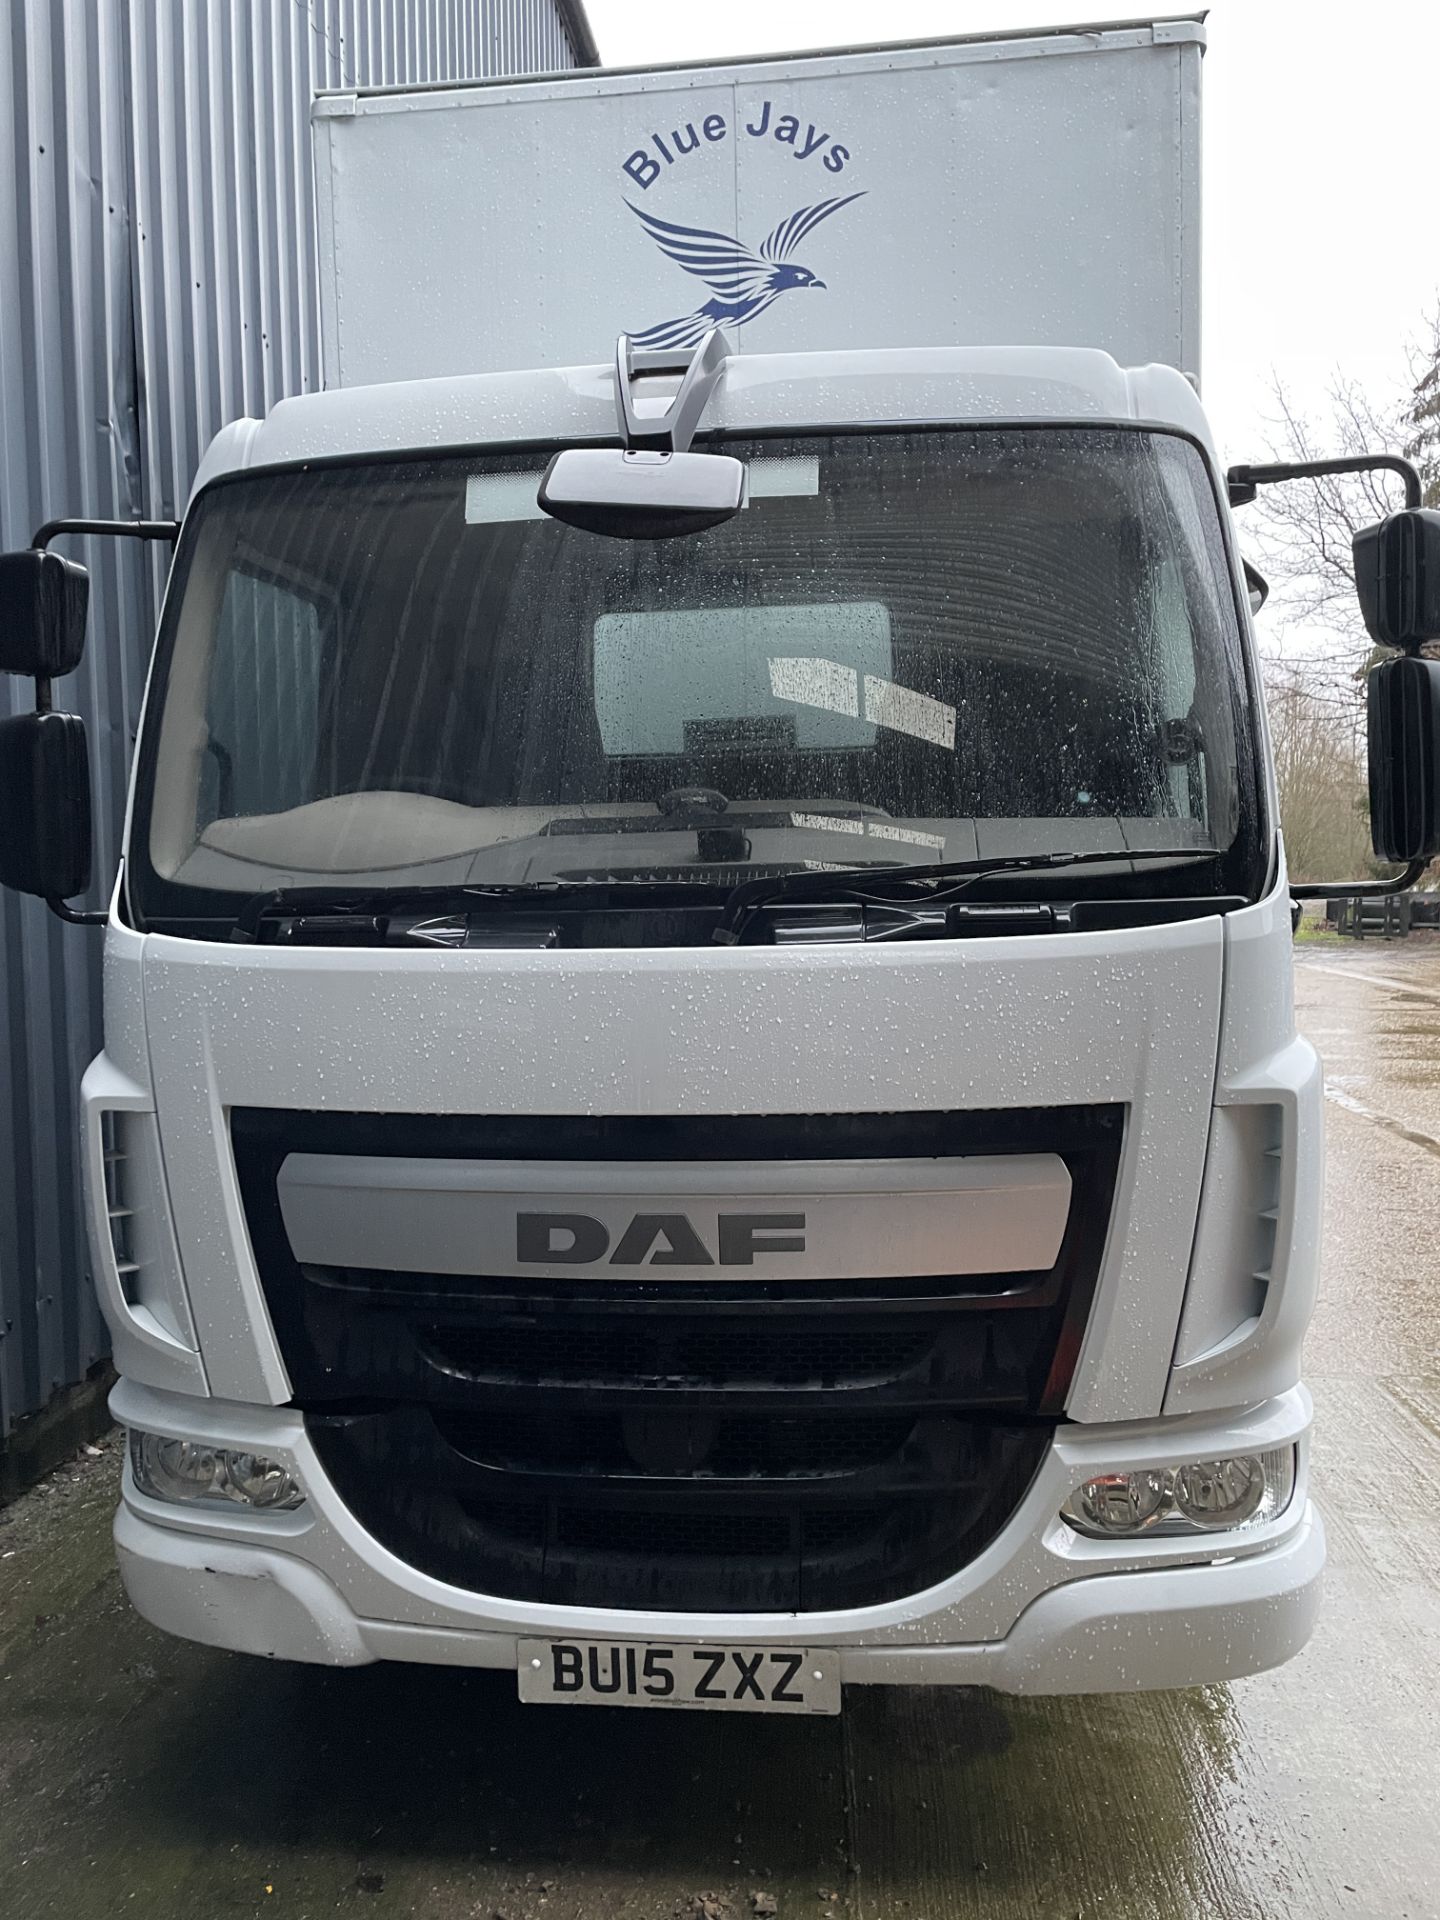 DAF FA LF.180 12t Euro 6 Extended Day Box Lorry, Registration BU15 ZXZ, First Registered 20th May 20 - Bild 2 aus 18